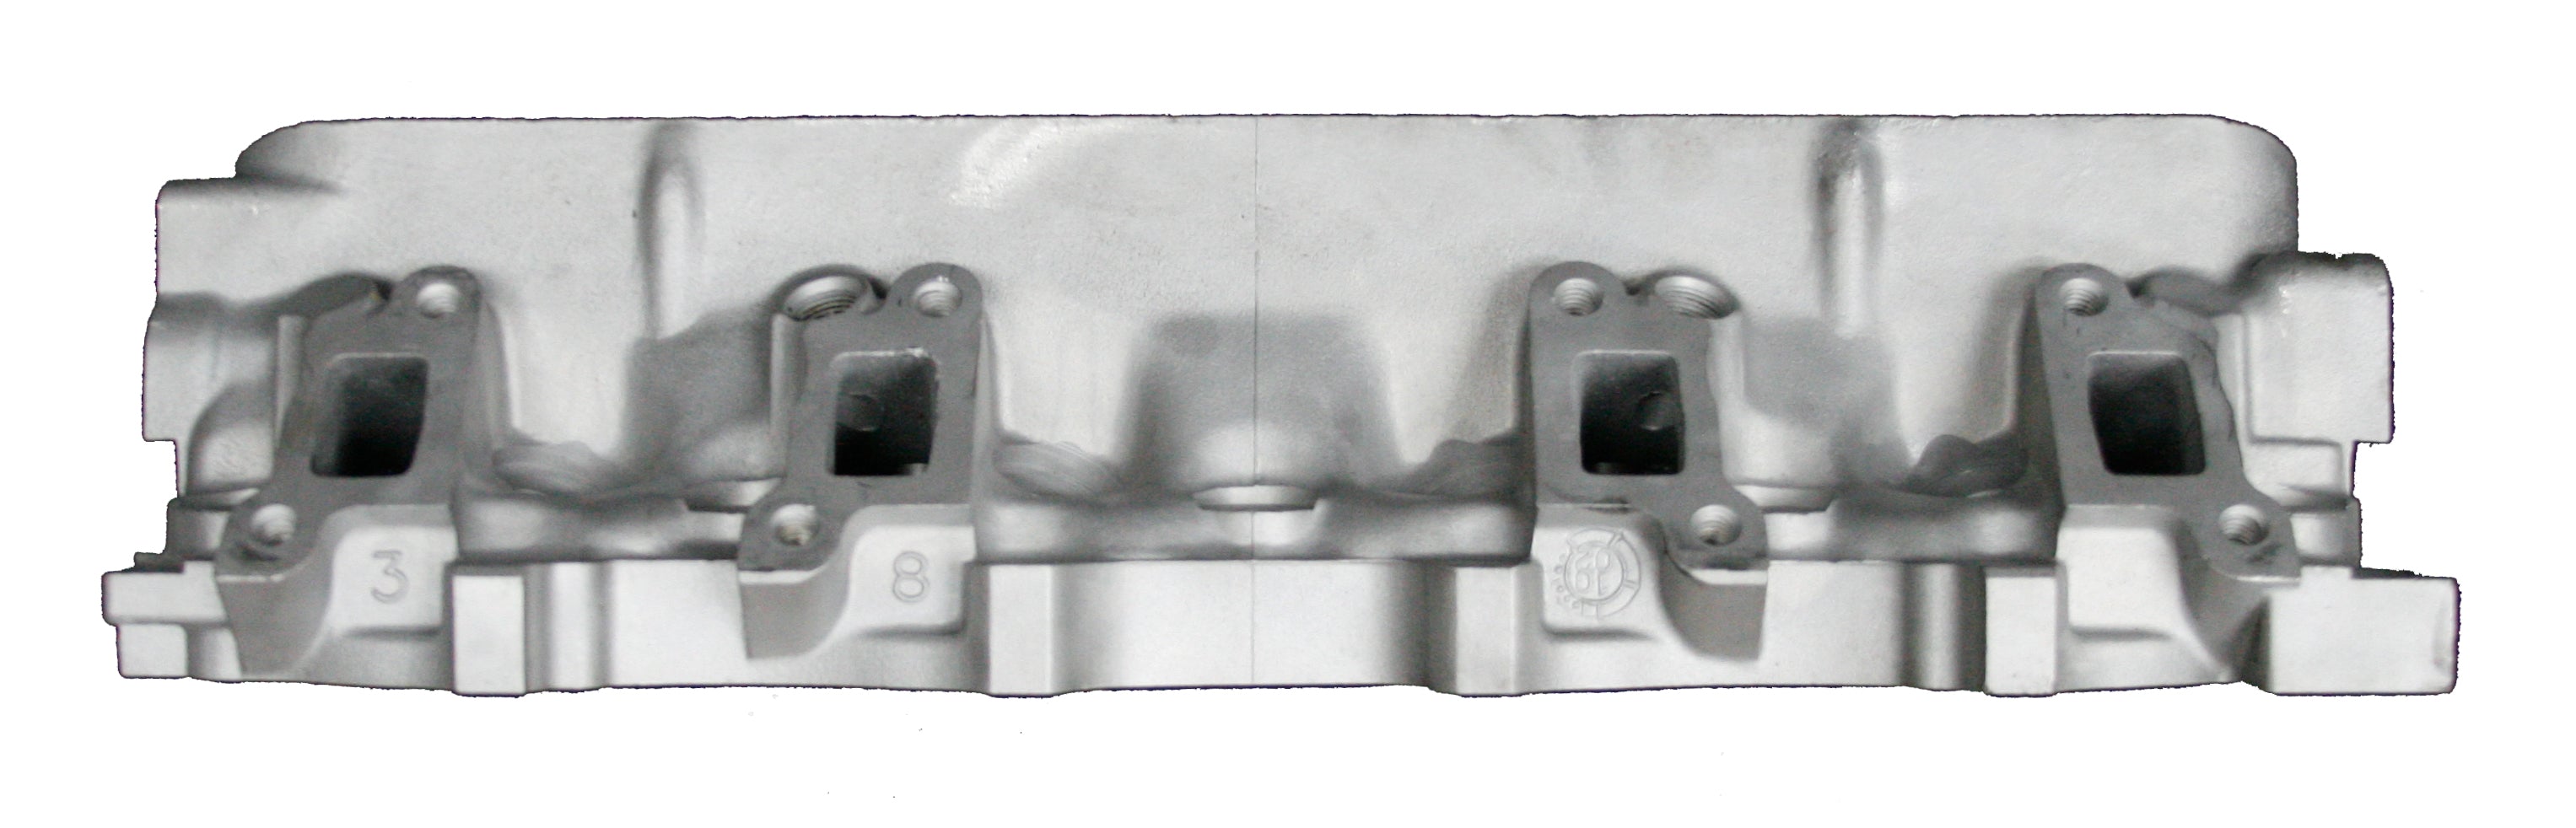 1995-1999 Land Rover 4.0L or 4.6L V8 Cylinder Head Casting # HRC2479 Both heads W/Smog Both Heads